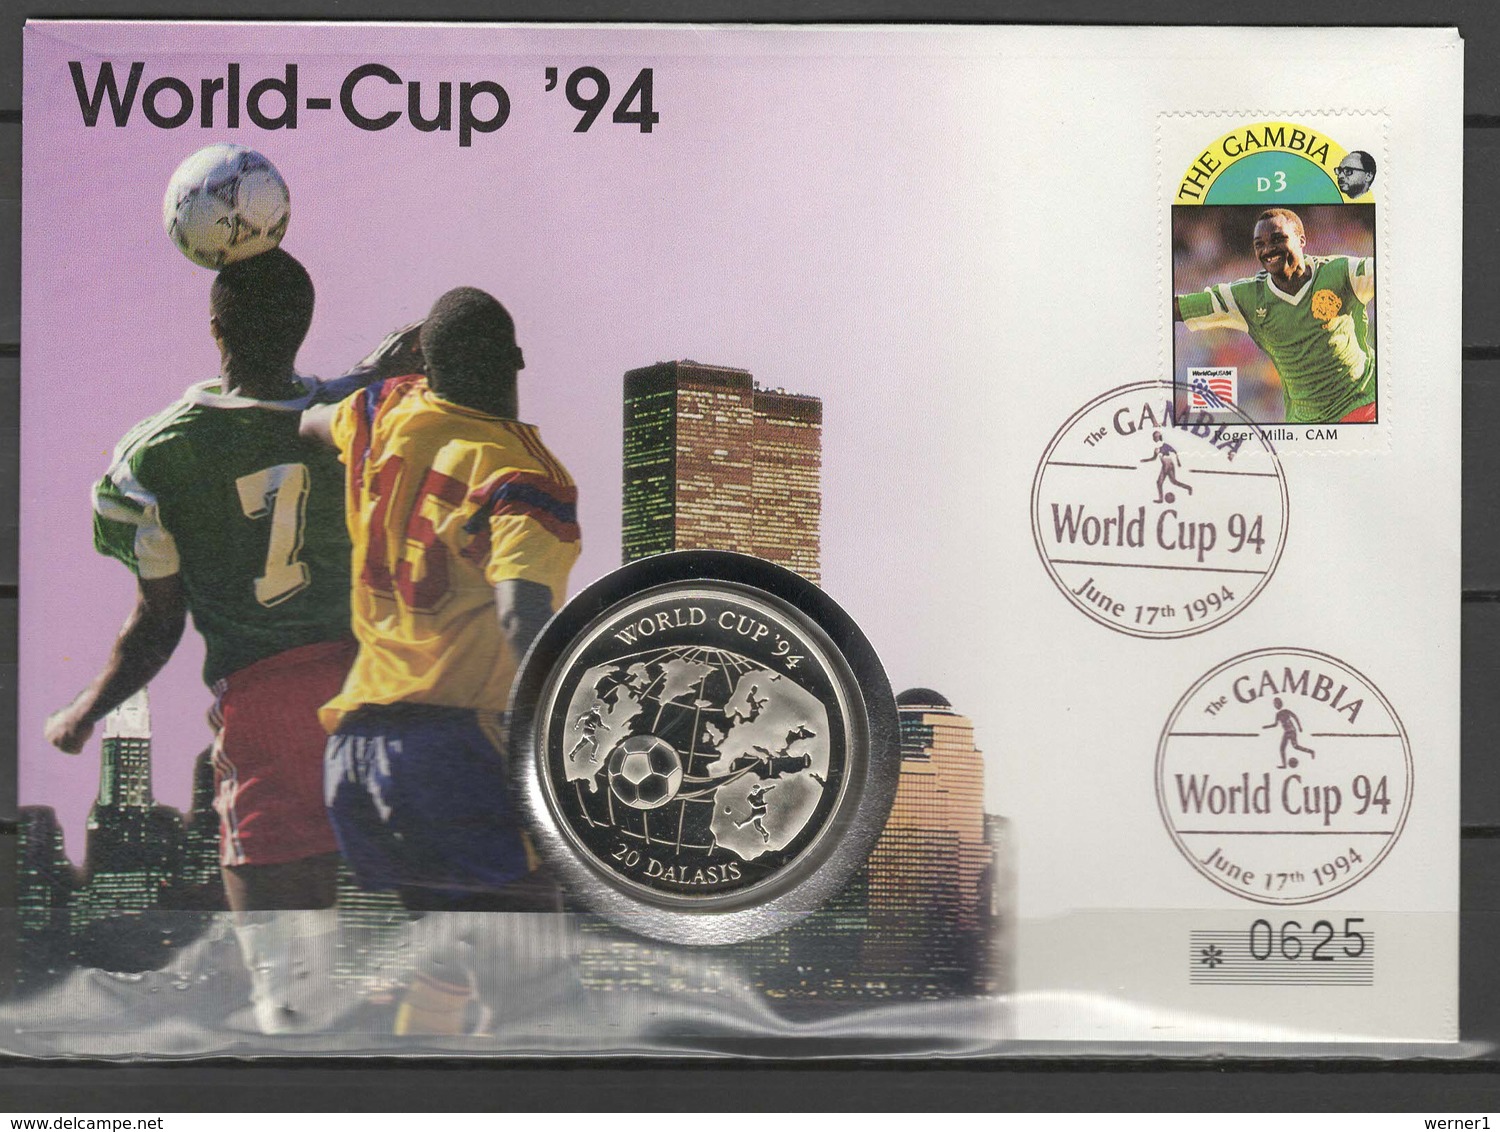 Gambia 1994 Football Soccer World Cup Numismatic Cover With 20 Dalasis Silver Coin - 1994 – USA